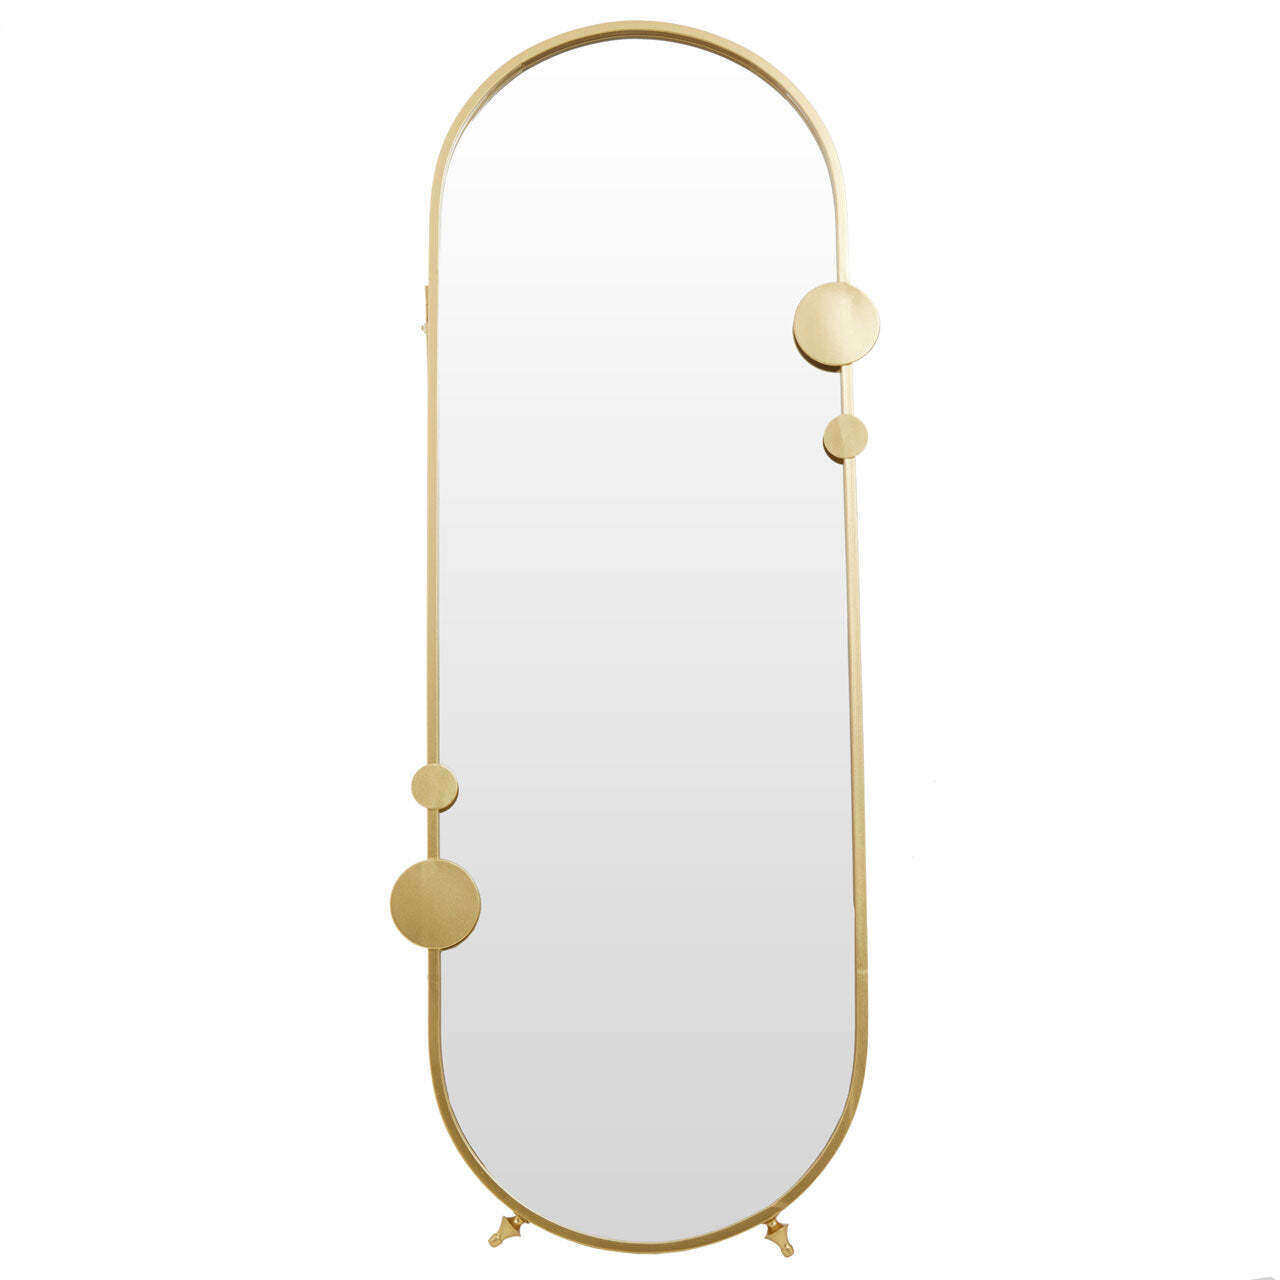 Olivia's Farrah Floor Standing Mirror in Champagne Gold - image 1